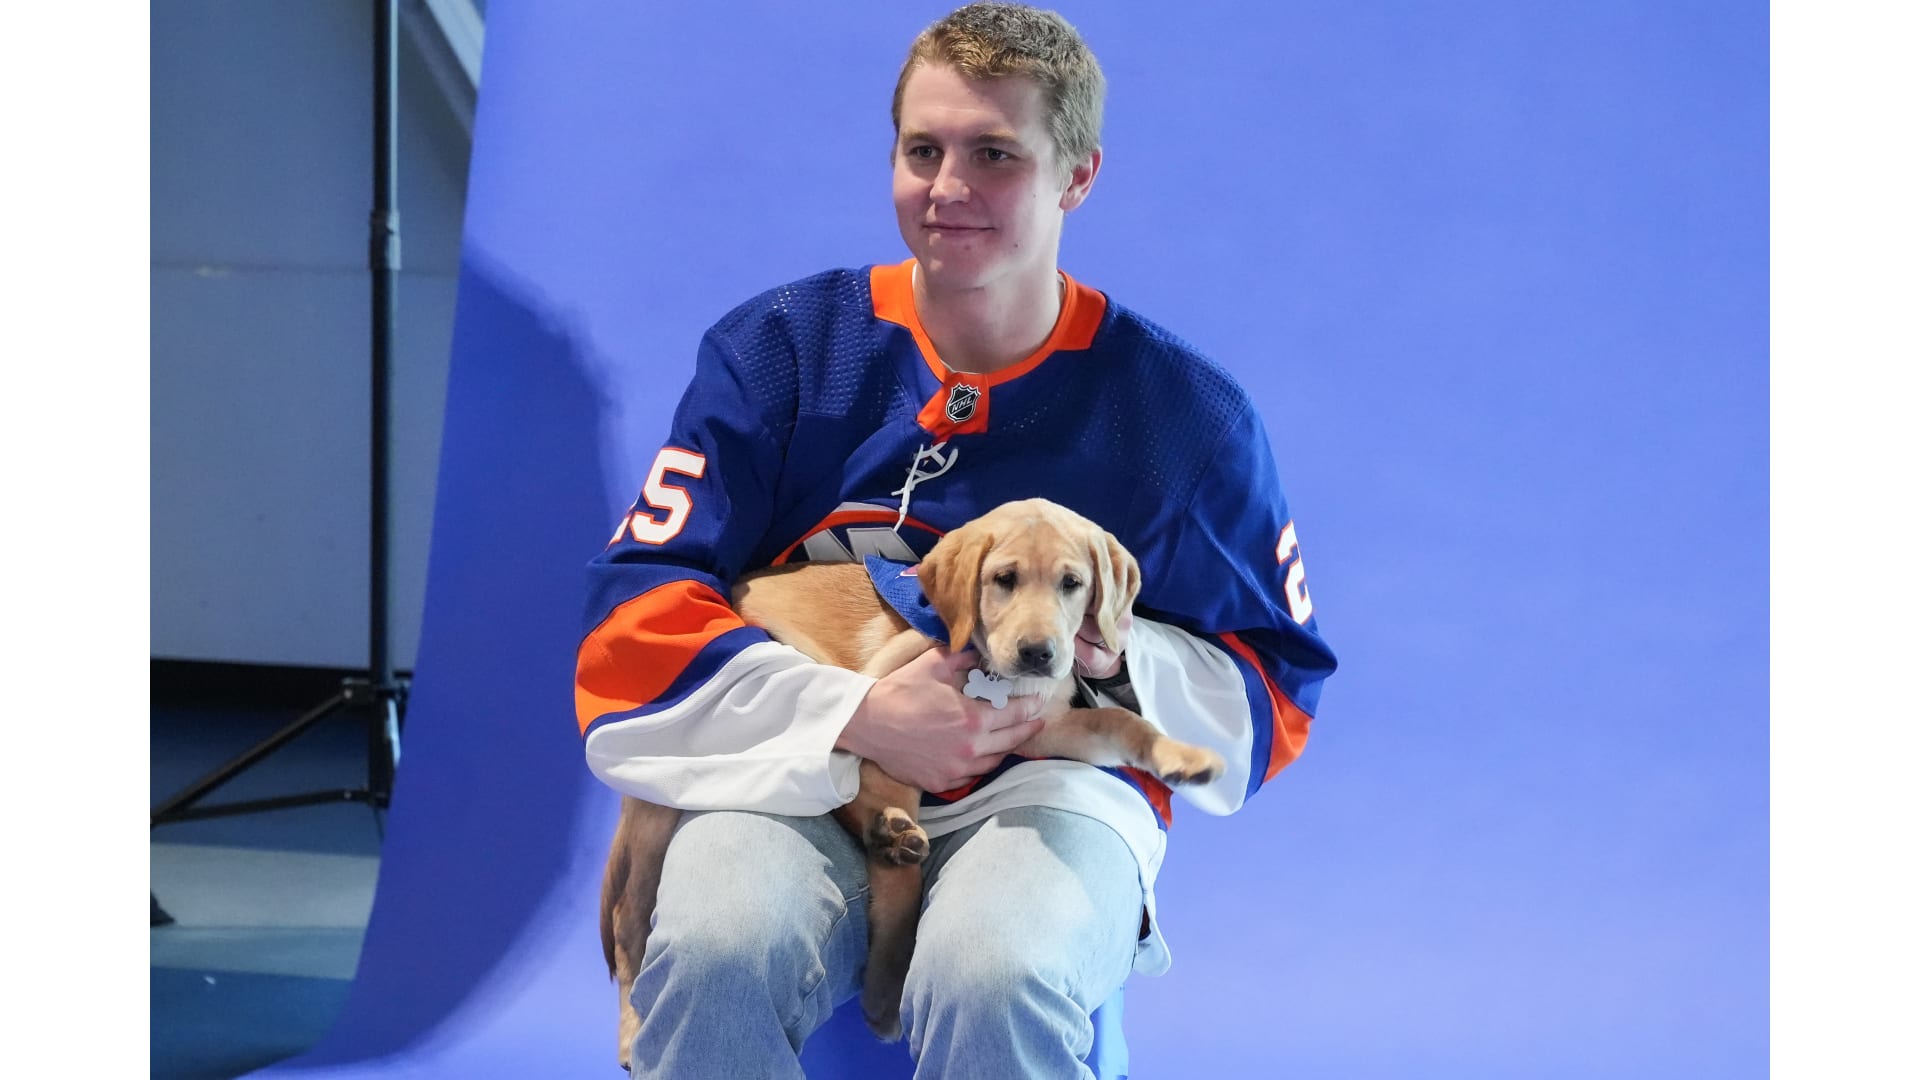 The Fourth New York Islanders' Puppy With a Purpose® Will Be Named “Jethro”